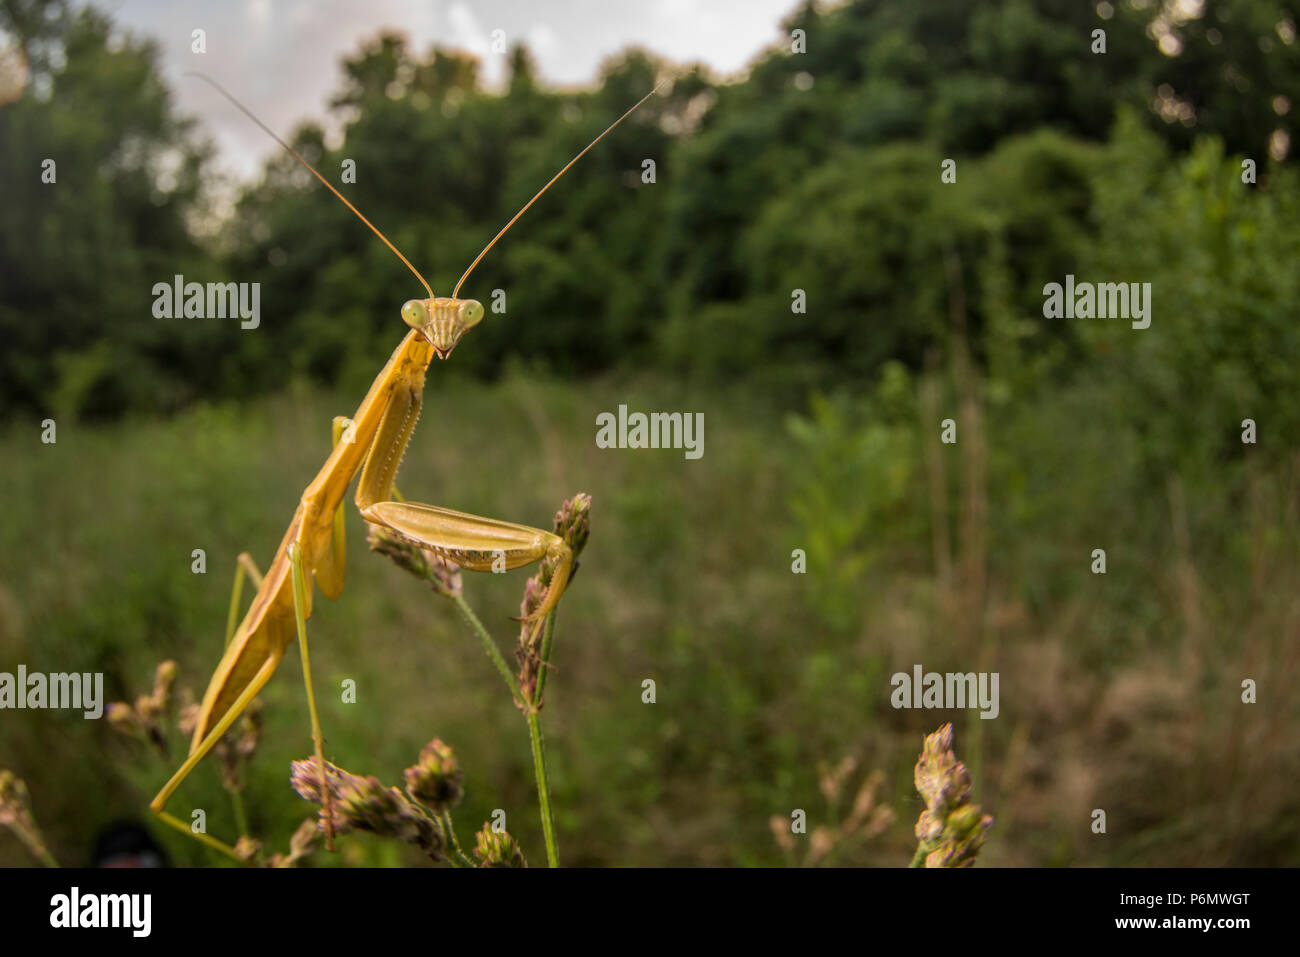 The Chinese mantis (Tenodera sinensis) is an introduced species in the USA, it is commonly used as a natural form of pest control. Stock Photo